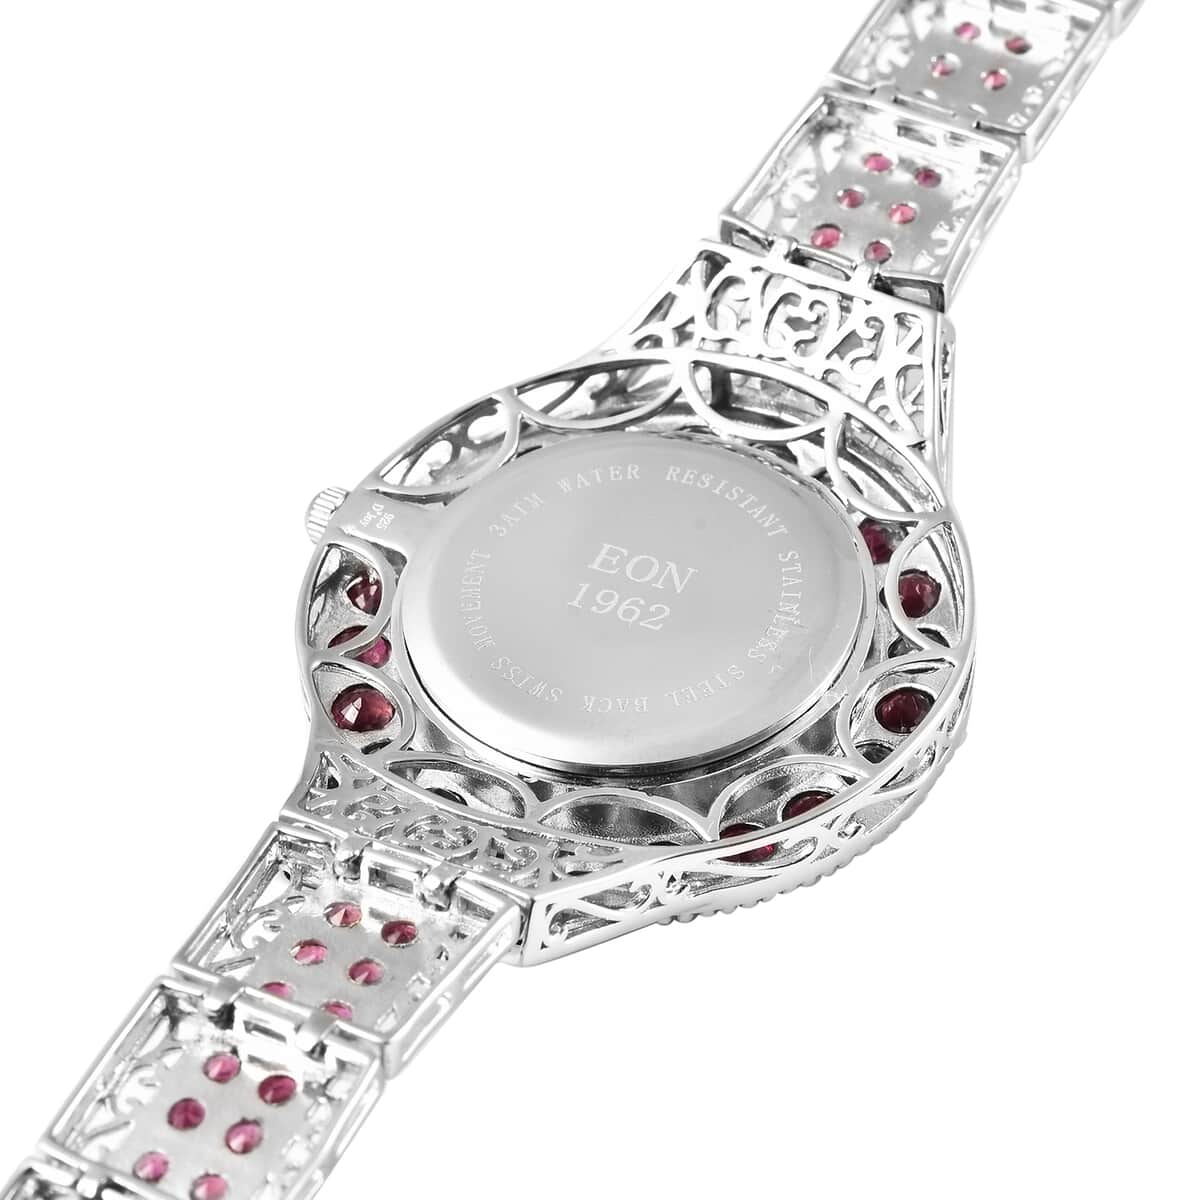 EON 1962 Niassa Ruby Swiss Movement Watch in Sterling Silver (38 g) image number 6